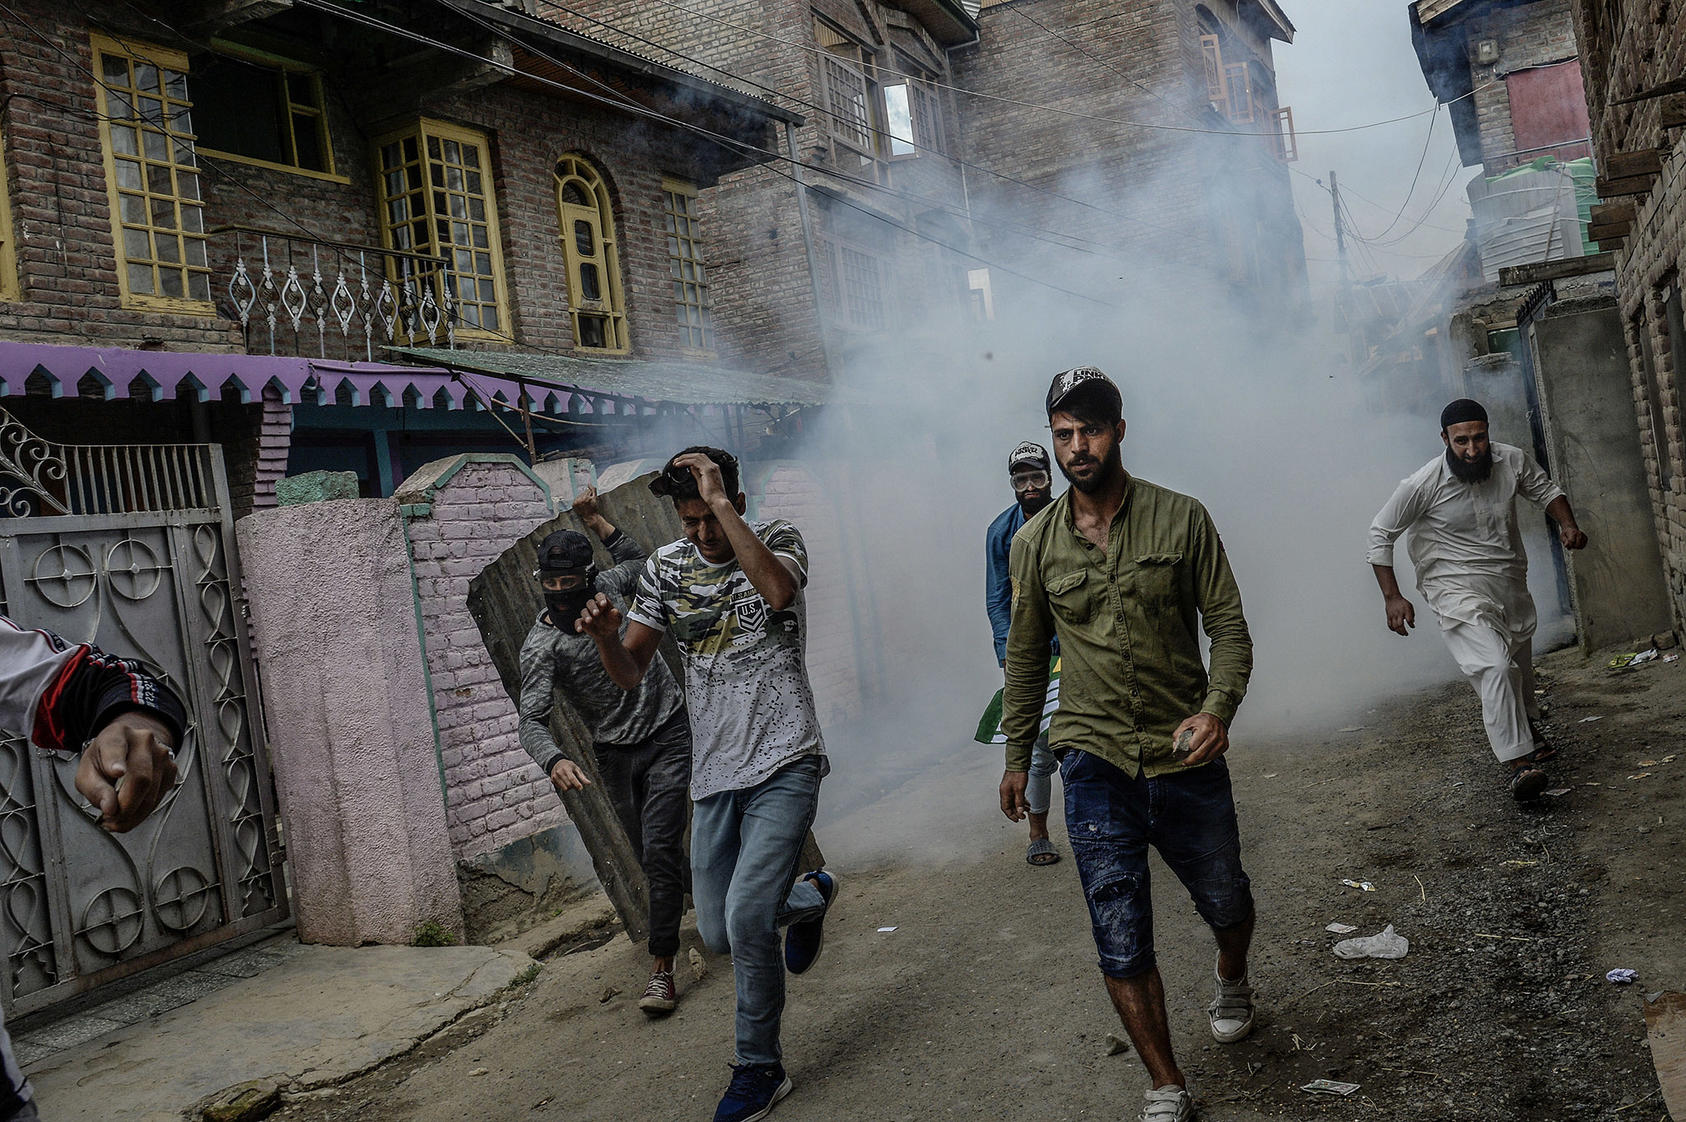 A violent protest on the outskirts of Srinagar, in Jammu and Kashmir, on August 16, 2019, after India stripped the Kashmir region of its autonomy. (Atul Loke/New York Times)